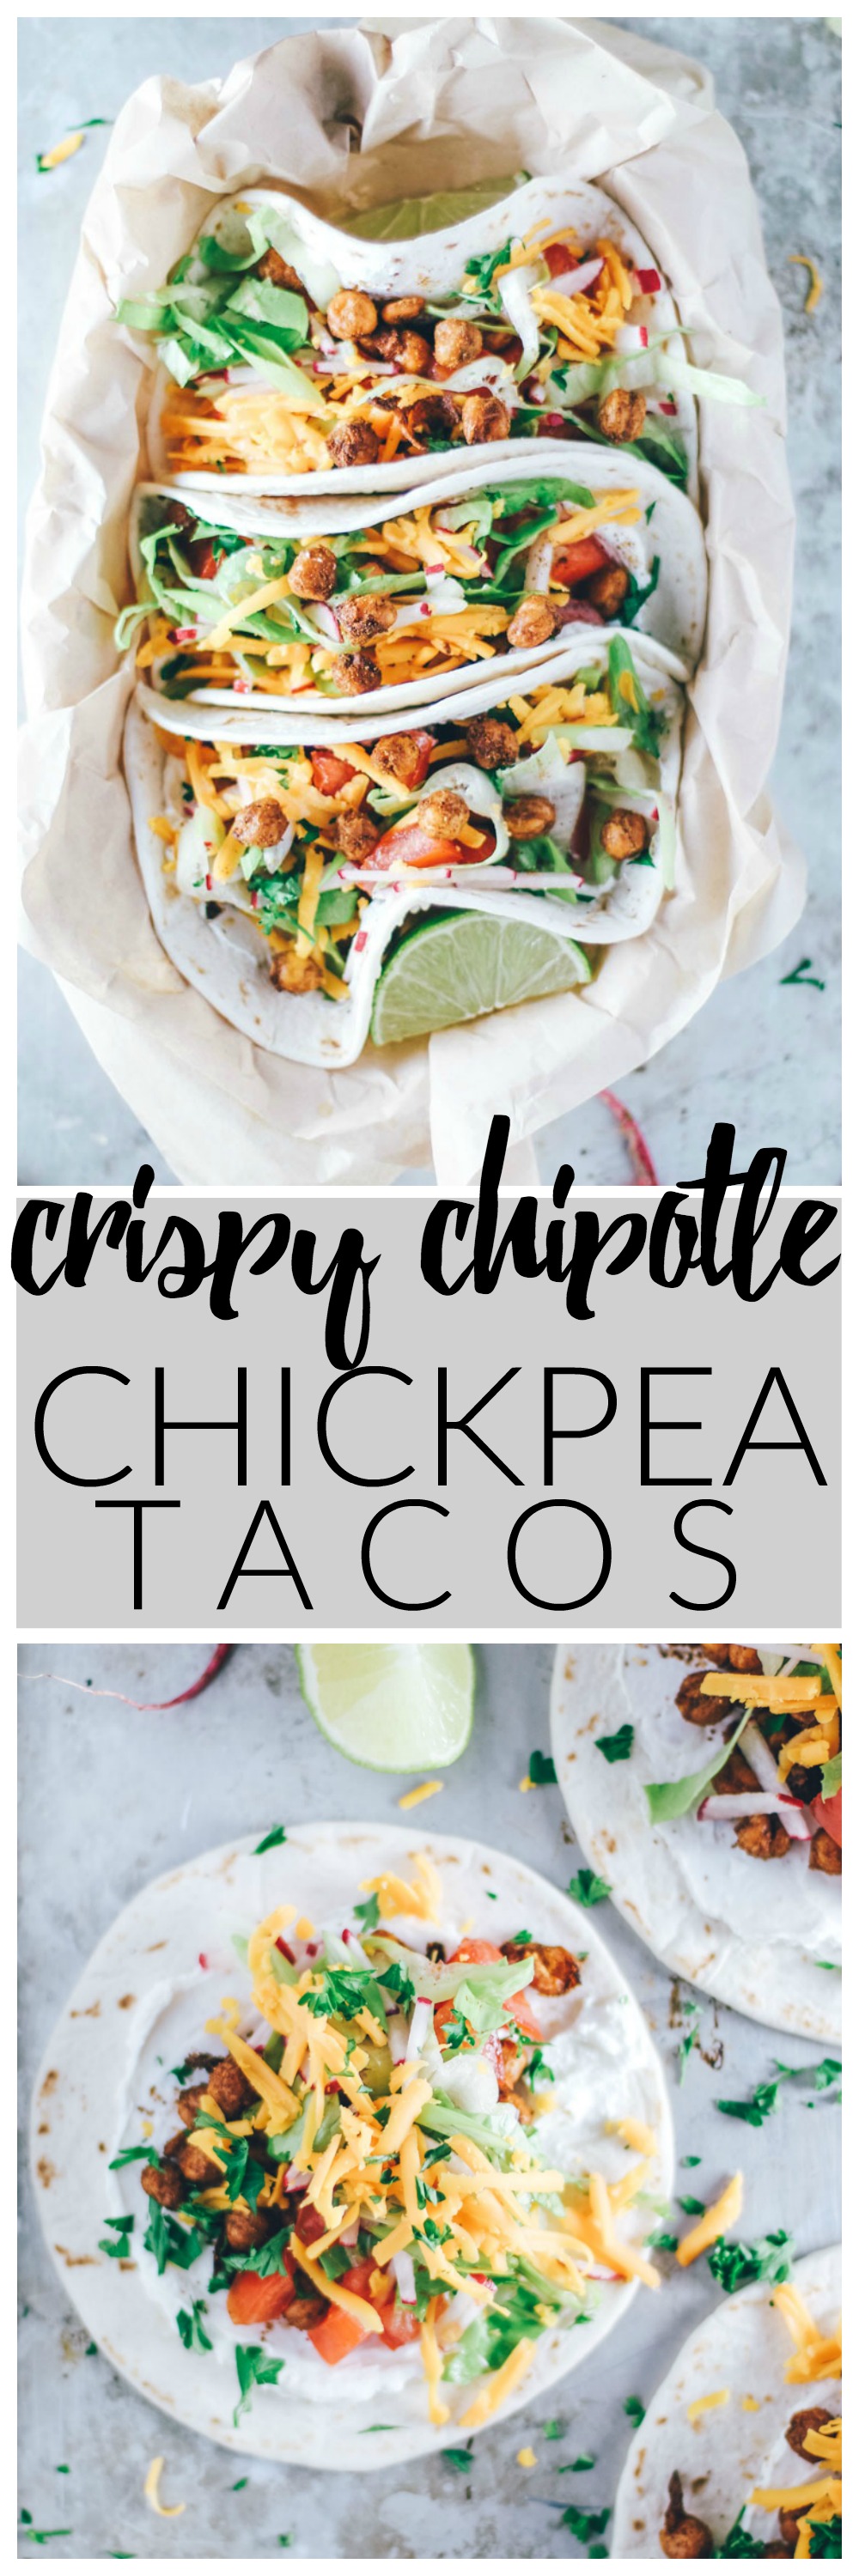 Crispy Chipotle Chickpea Tacos | Killing Thyme — These smokey and spicy tacos are packed with plant-based protein for vegetarian perfection. Fabulous for Taco Tuesday, or any other day your belly wants tacos.